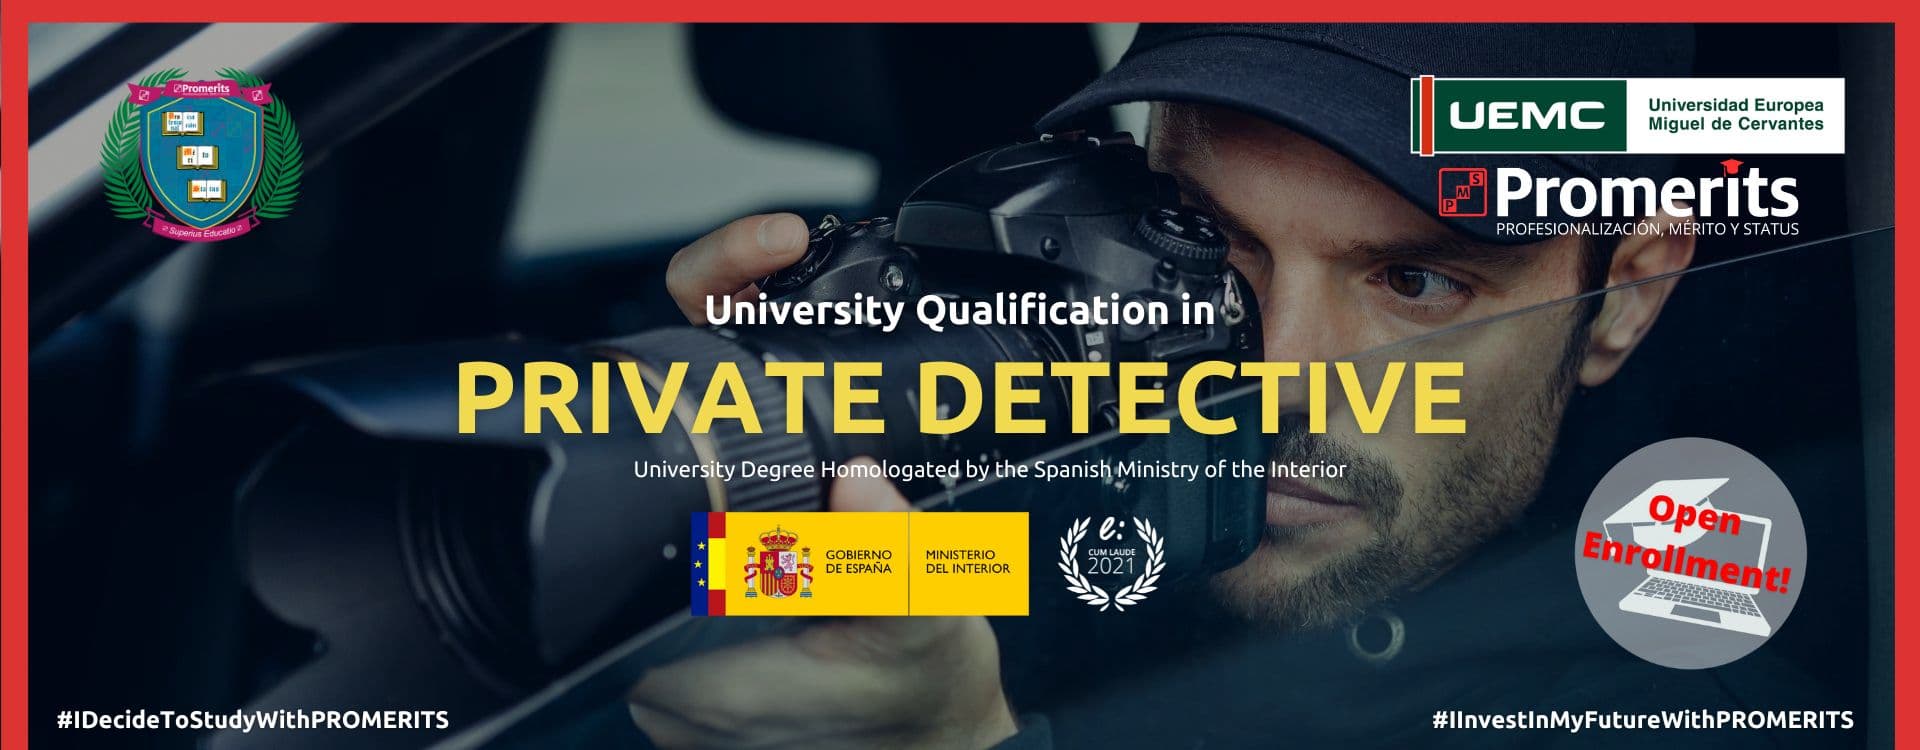 University Qualification in Private Detective